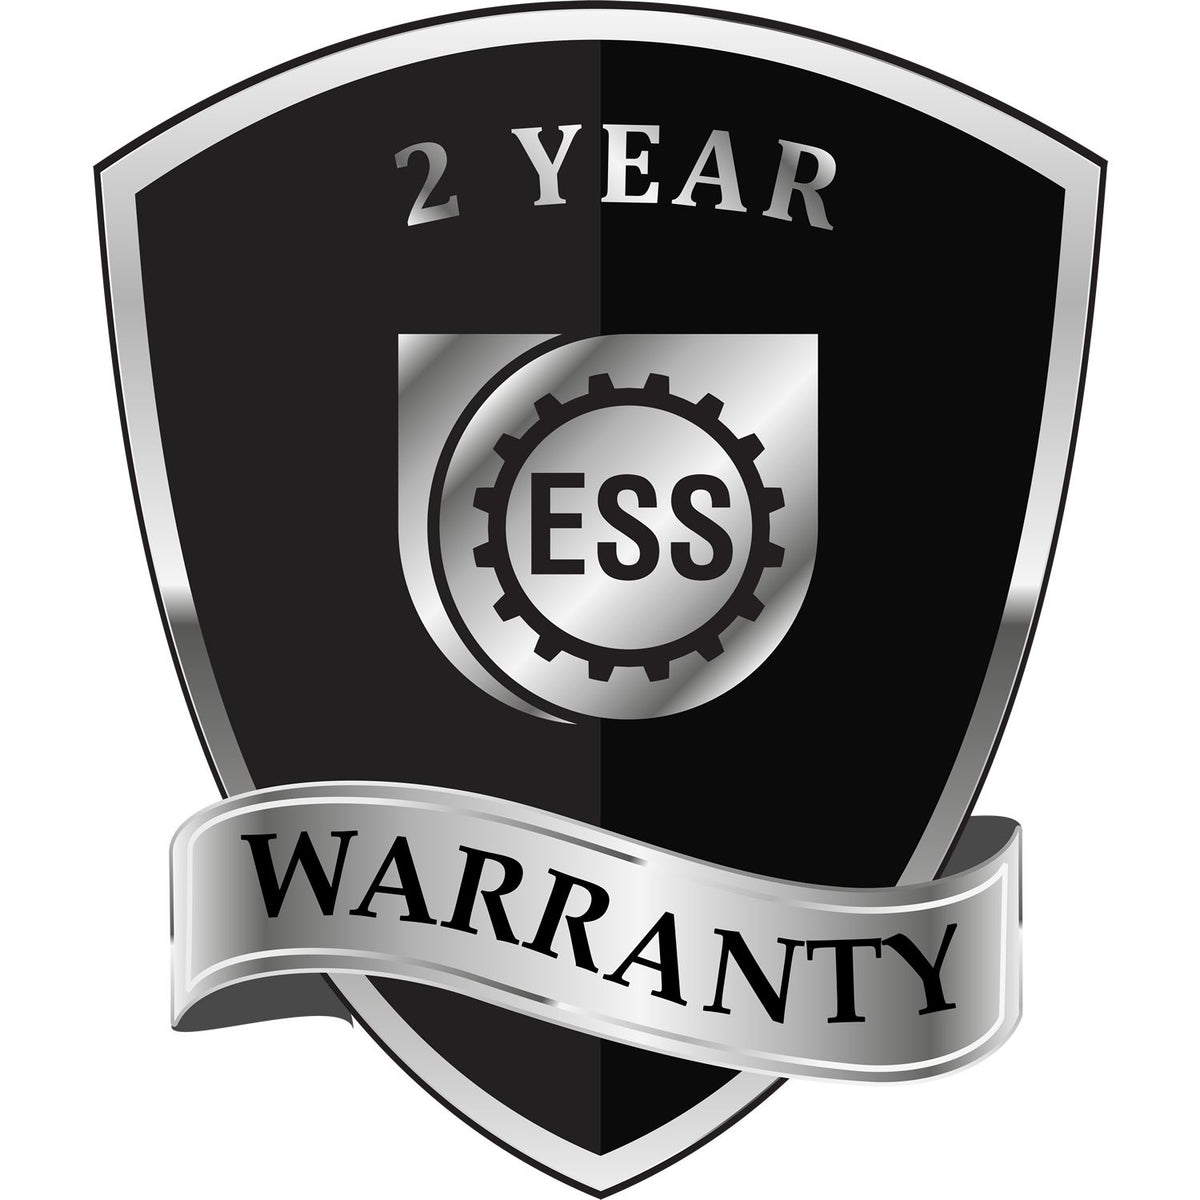 A black and silver badge or emblem showing warranty information for the Hybrid Illinois Architect Seal